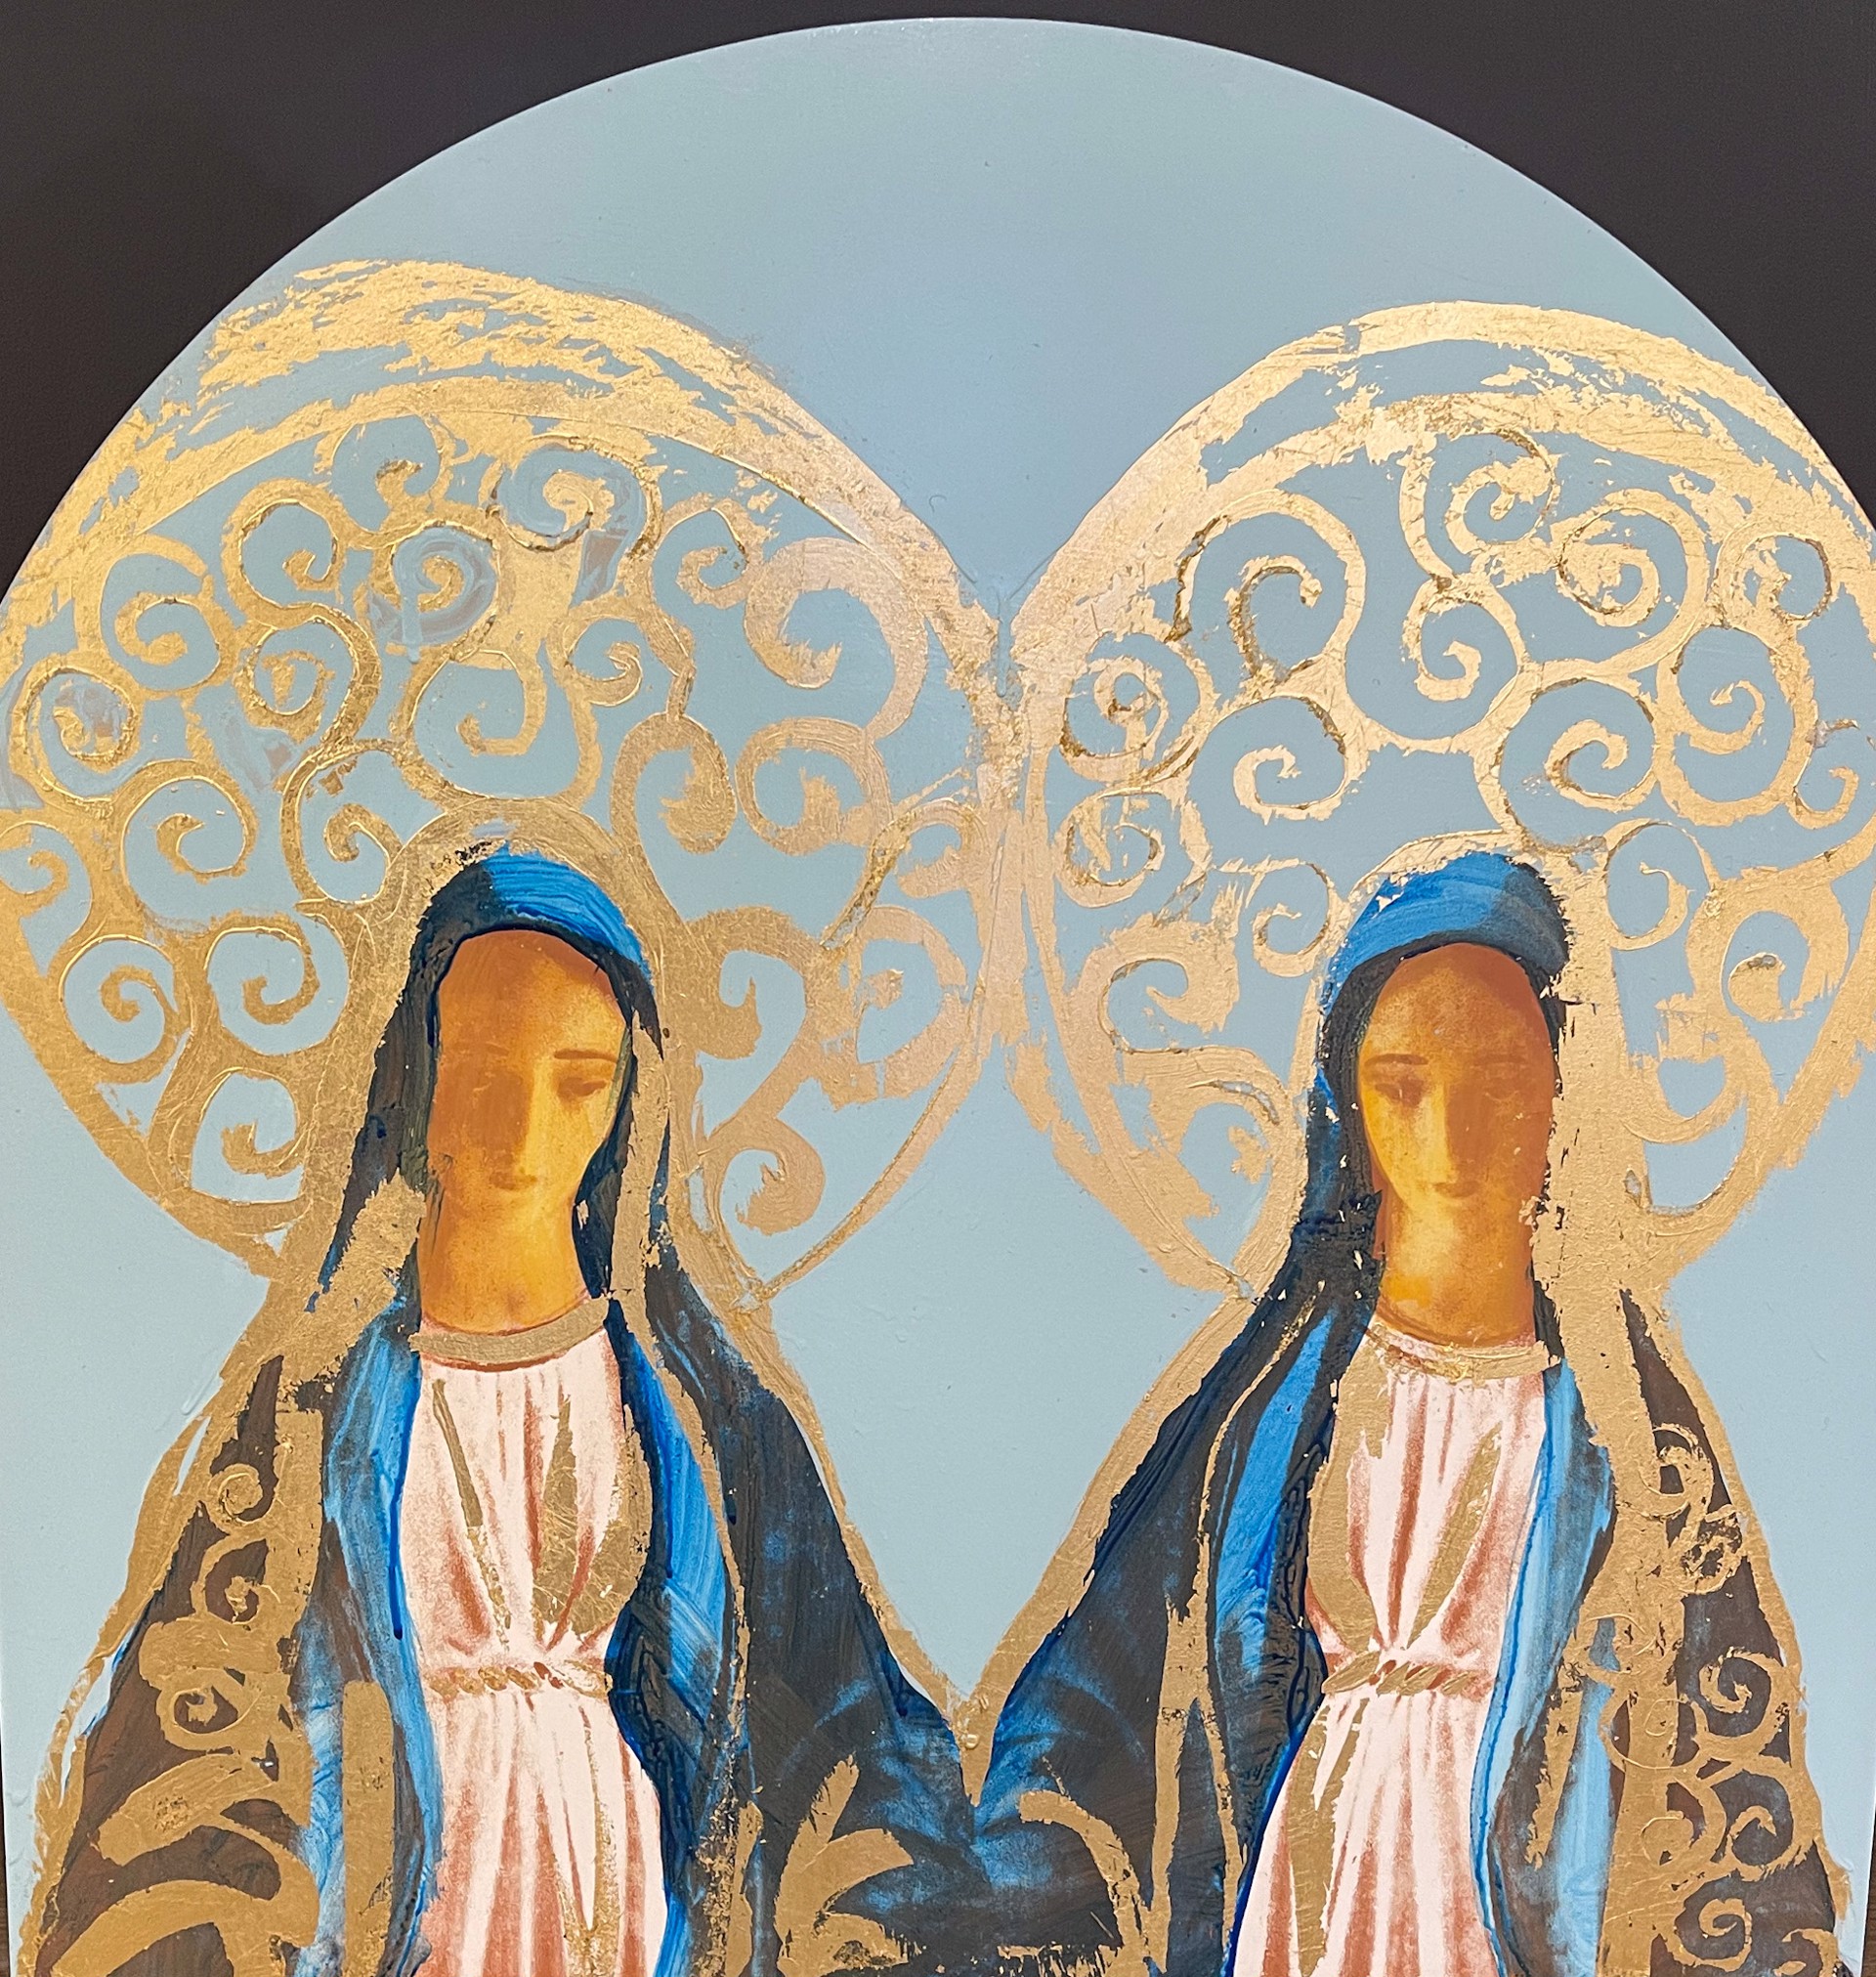 Mirrored Hail Mary in Blue by Megan Coonelly